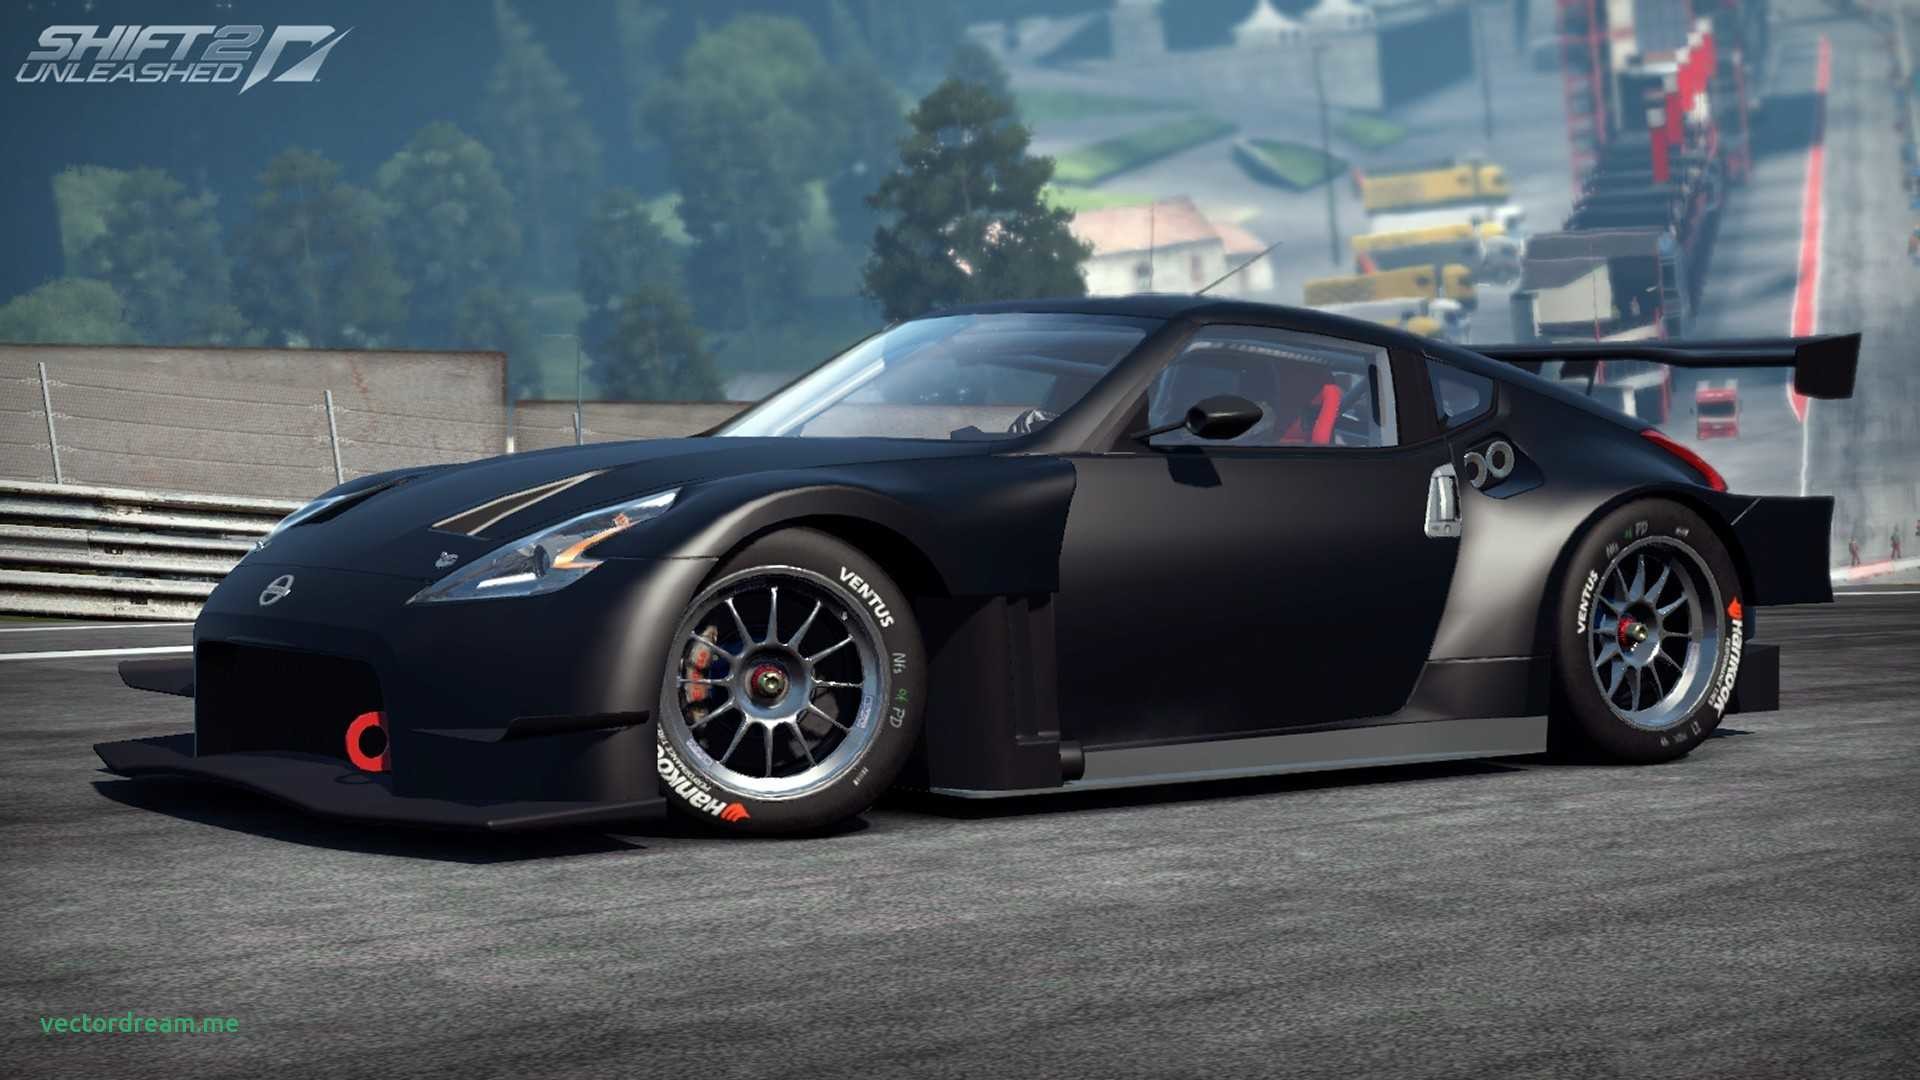 1920x1080 Car Game Wallpapers Hd Awesome Shift 2 Unleashed Nissan 370z Cars Games  Wallpaper